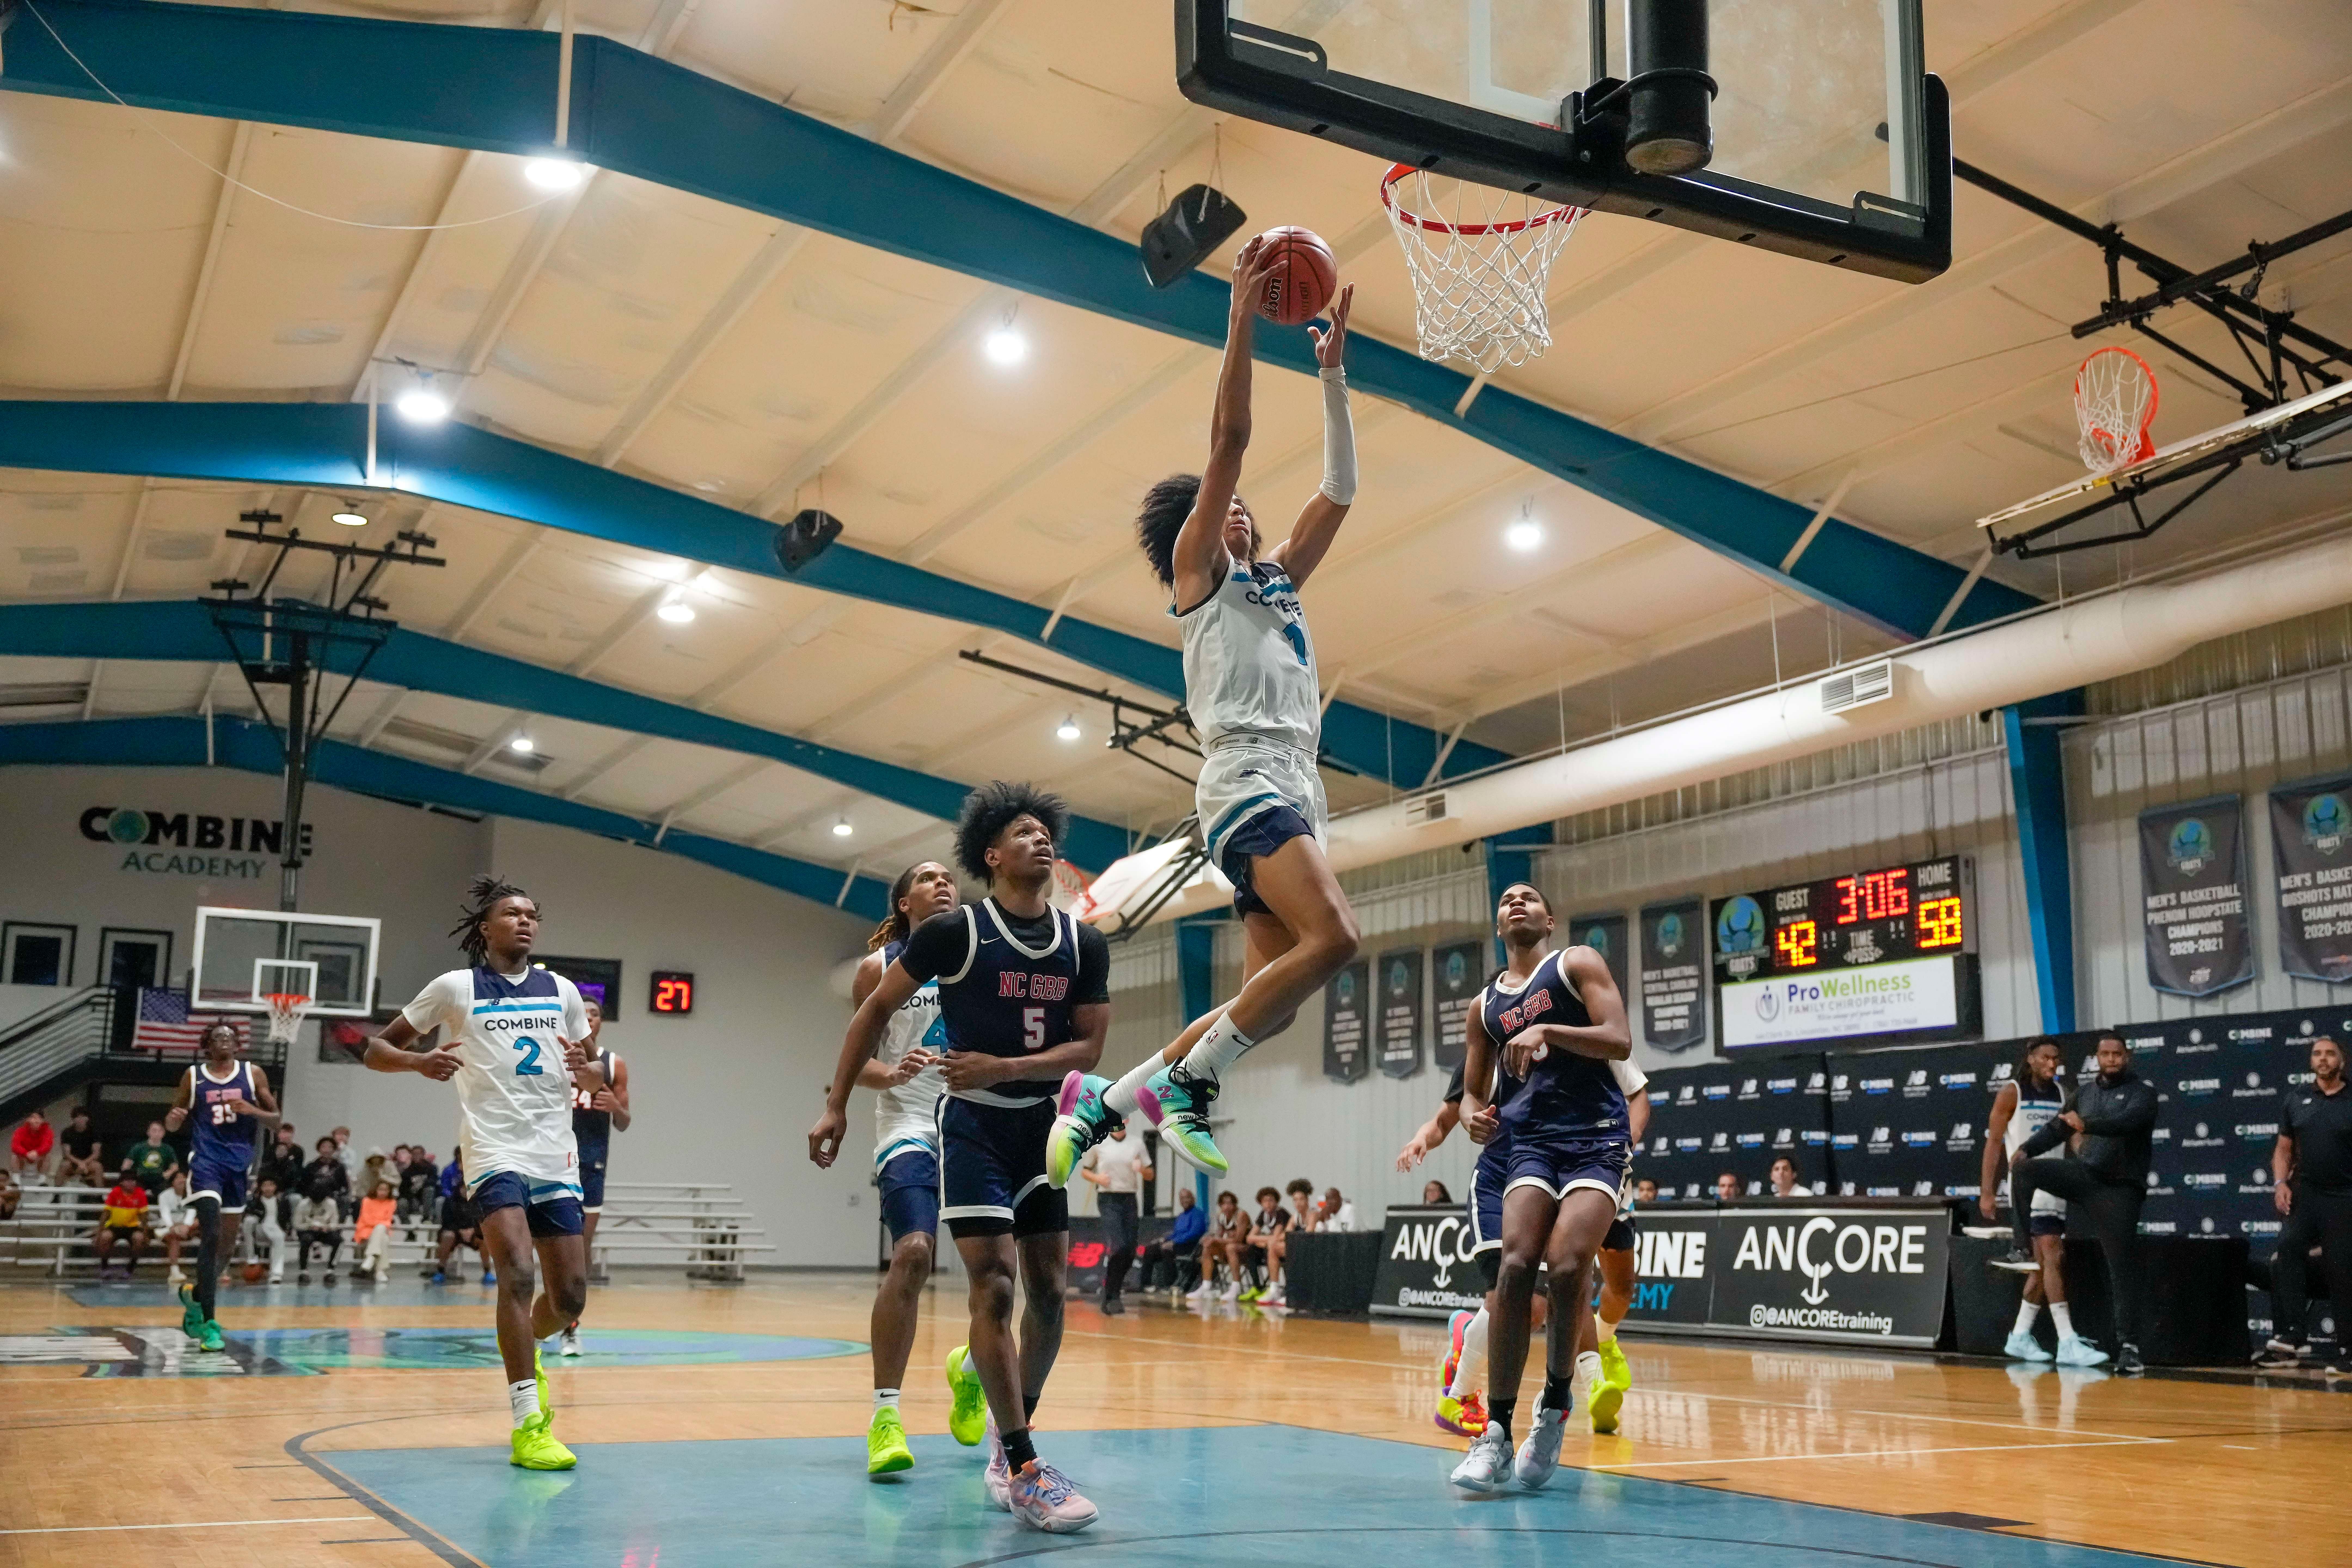 In the 2024 NBA Draft Combine, Trentyn Flowers jumped 42.0 inches, placing him in a four-way tie for first place in the vertical leap rankings (Image Source: IMAGN).